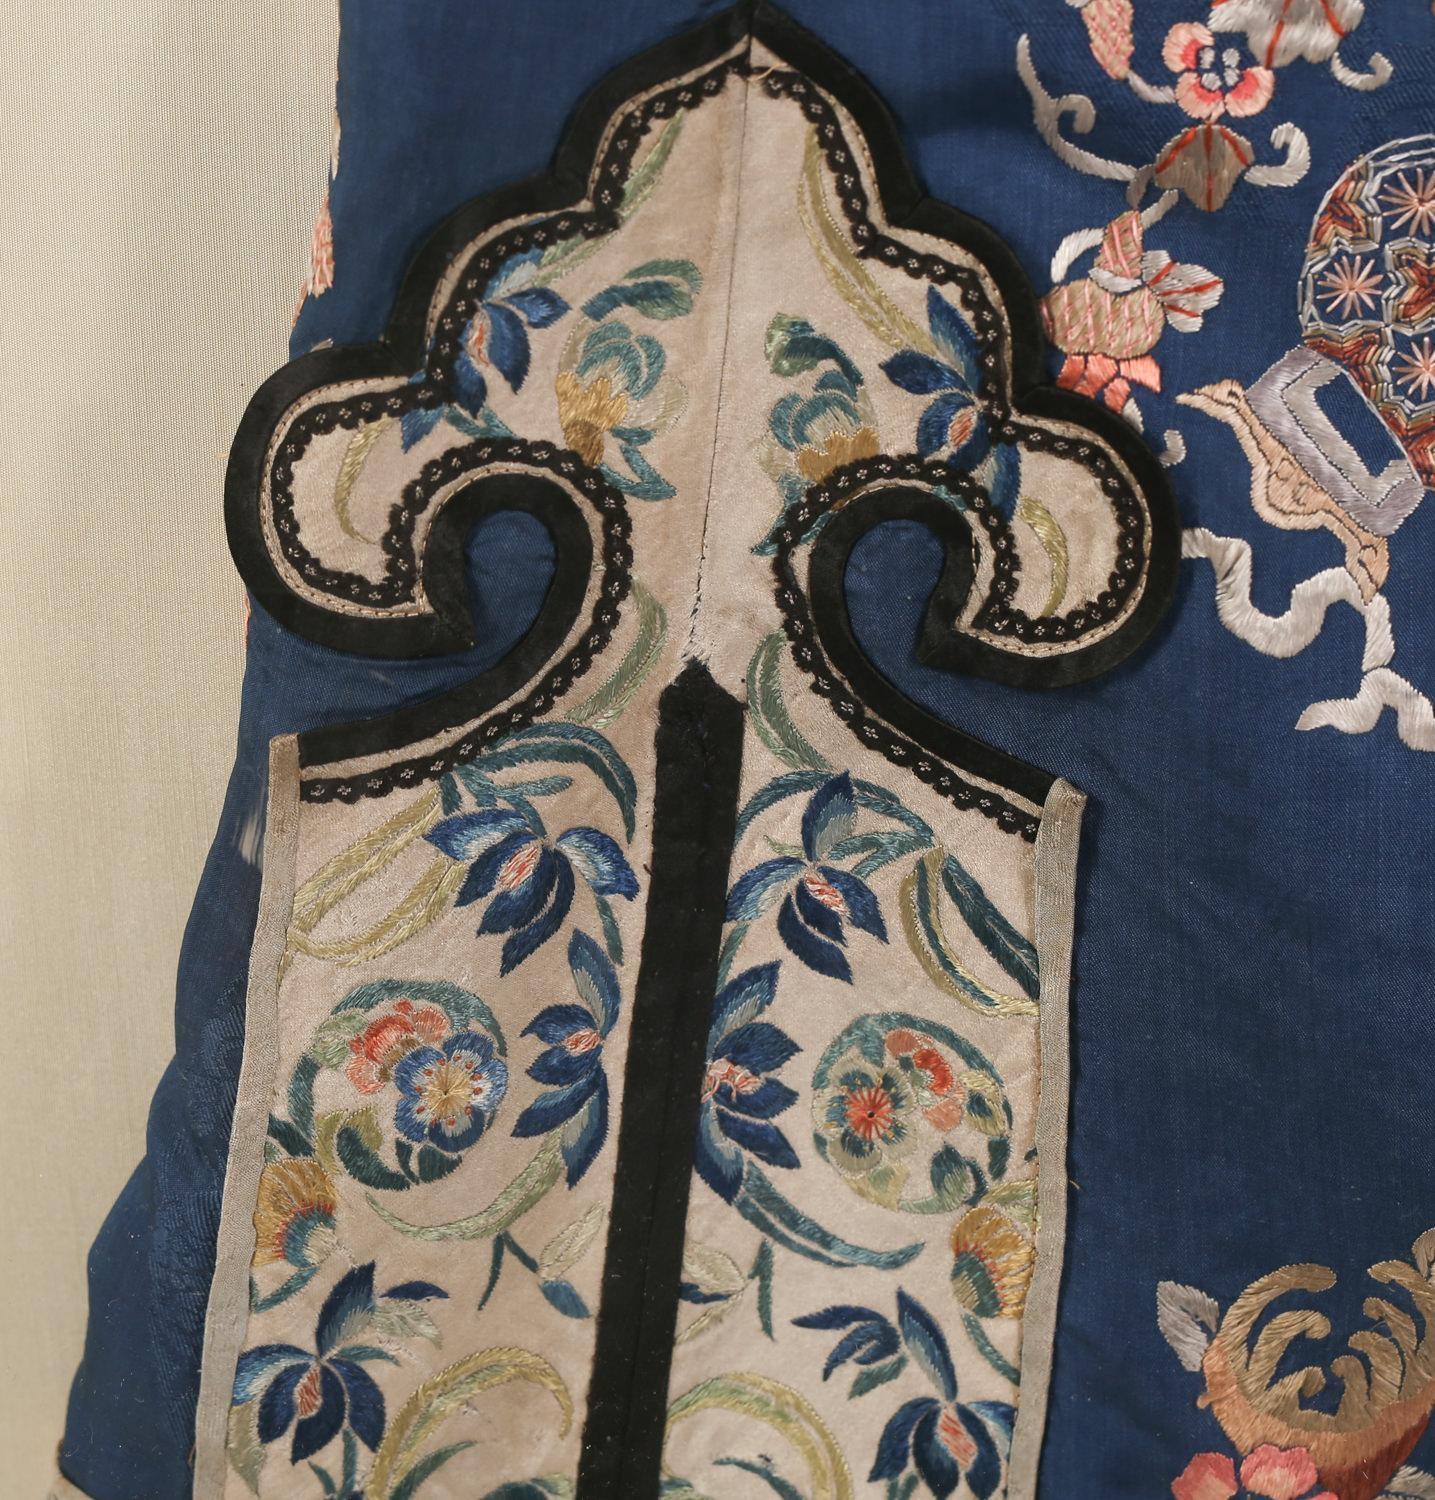 Chinese embroidered blue silk robe in a plexiglass box, Qing dynasty. Late 19th century, beautifully custom framed in Plexy glass frame to keep it in excellent condition, from an important Palm Beach collection.
Measures: Length 40 1/2 inches, the